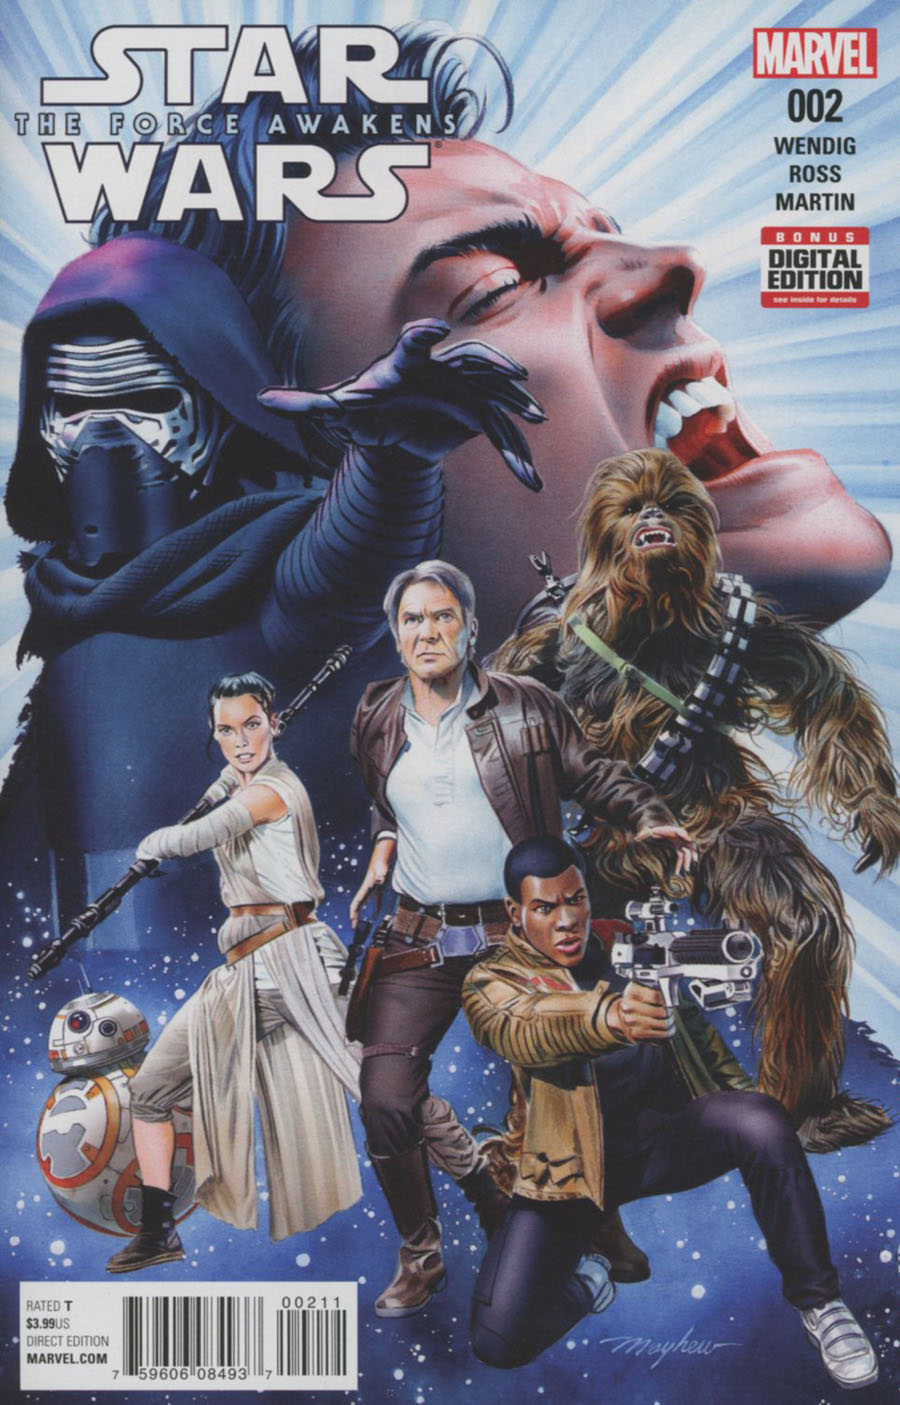 Star Wars Episode VII The Force Awakens Adaptation #2 Cover A Regular Mike Mayhew Cover